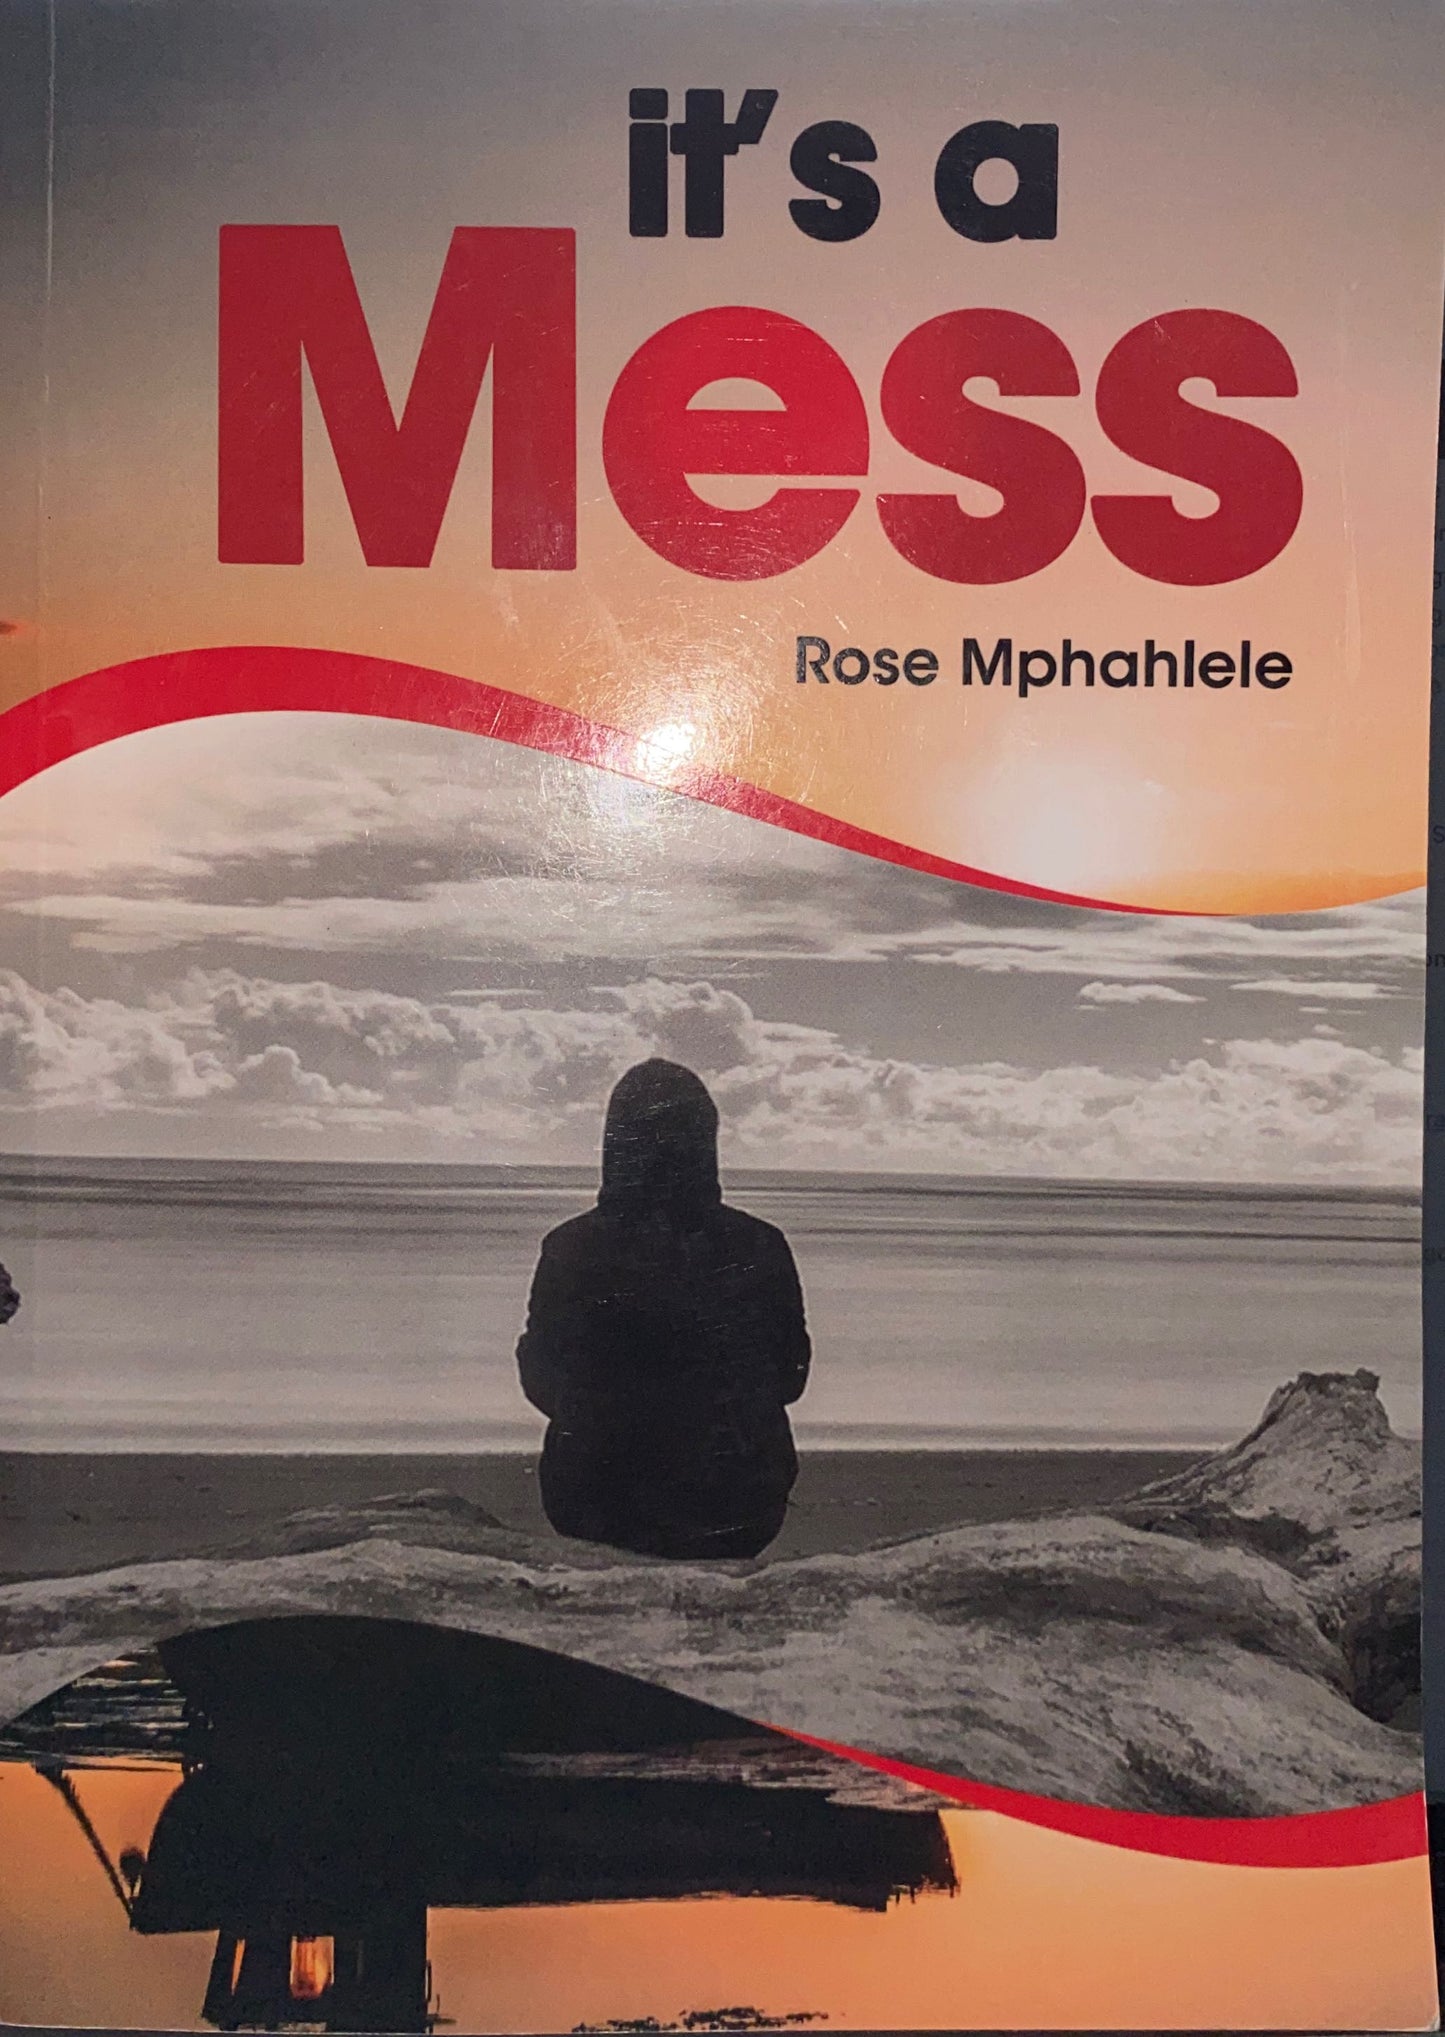 It's a Mess, by Rose Mphahlele